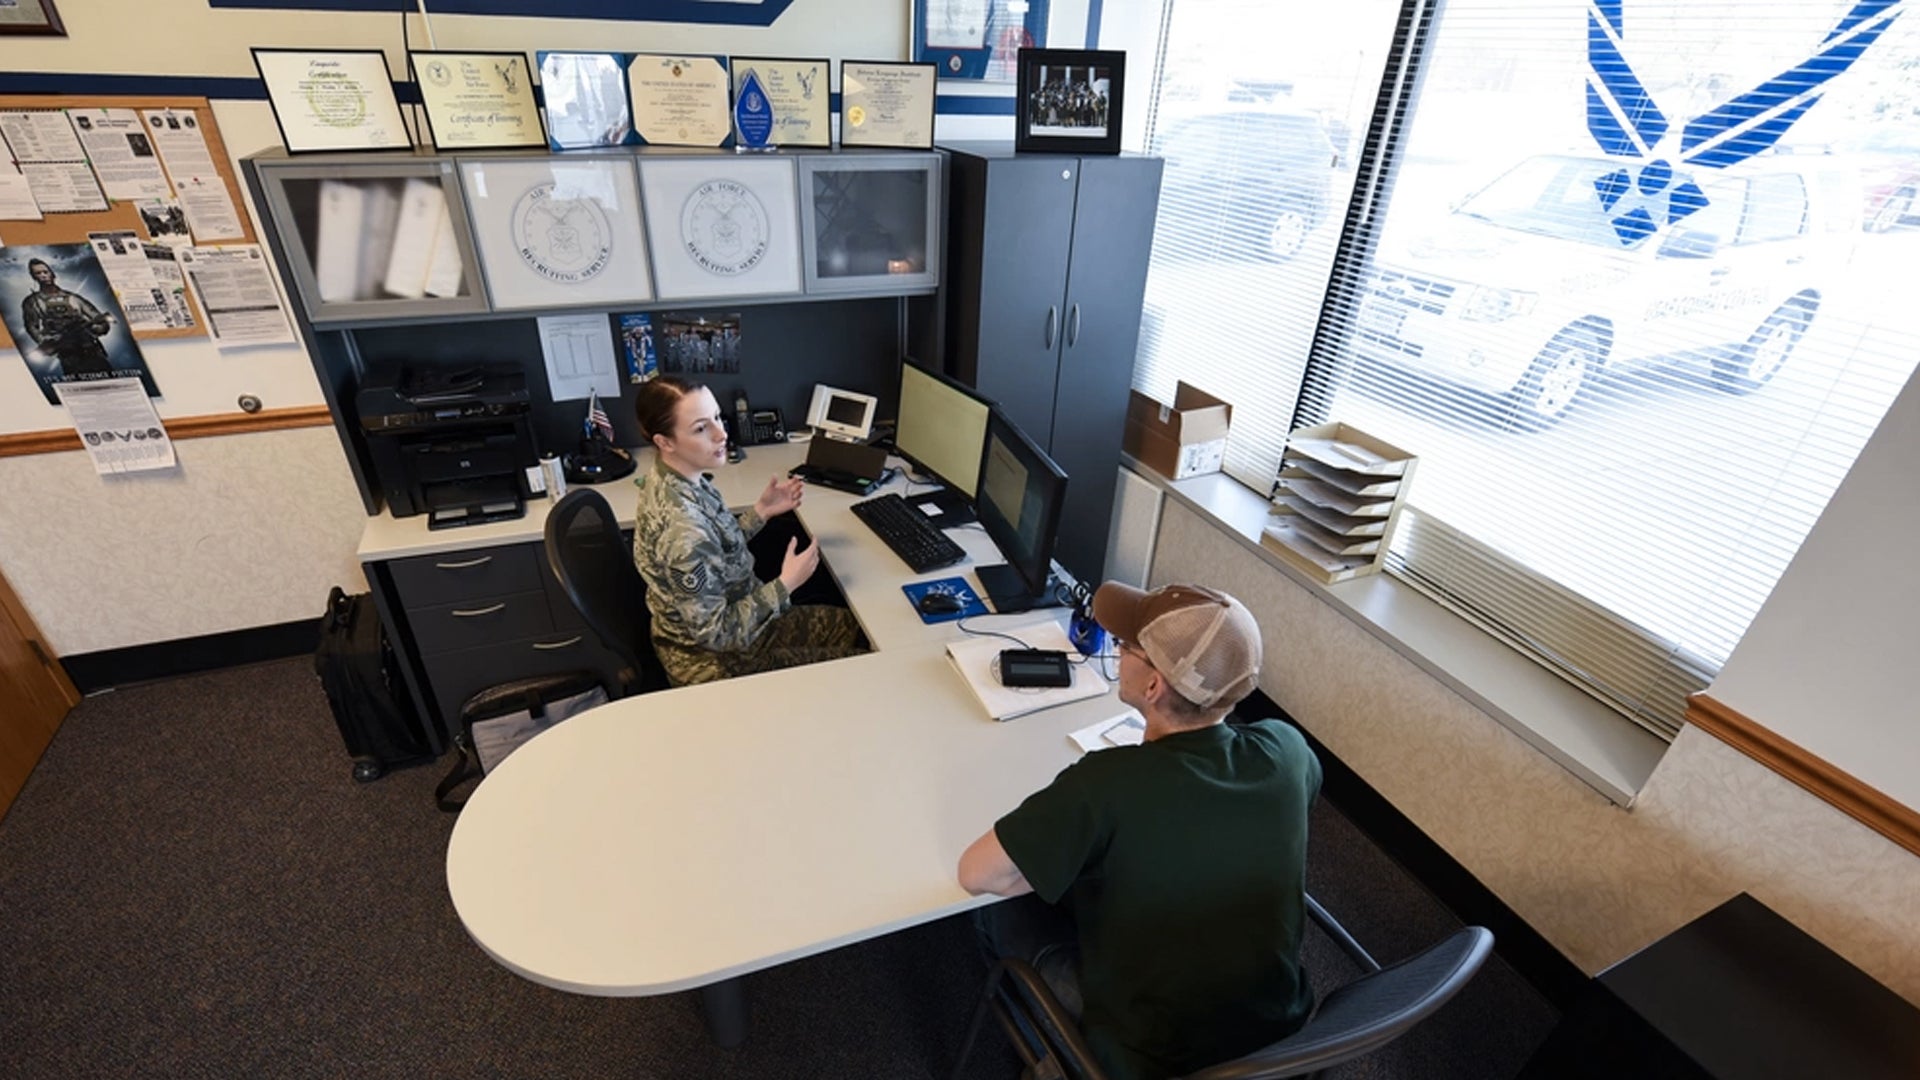 Air Force Tech. Sgt. Kimberly Reeser, recruiter located in Grand Forks, North Dakota, assists recruit with the transition into the military, May 14, 2018. (Airman 1st Class Melody Wolff/U.S. Air Force)